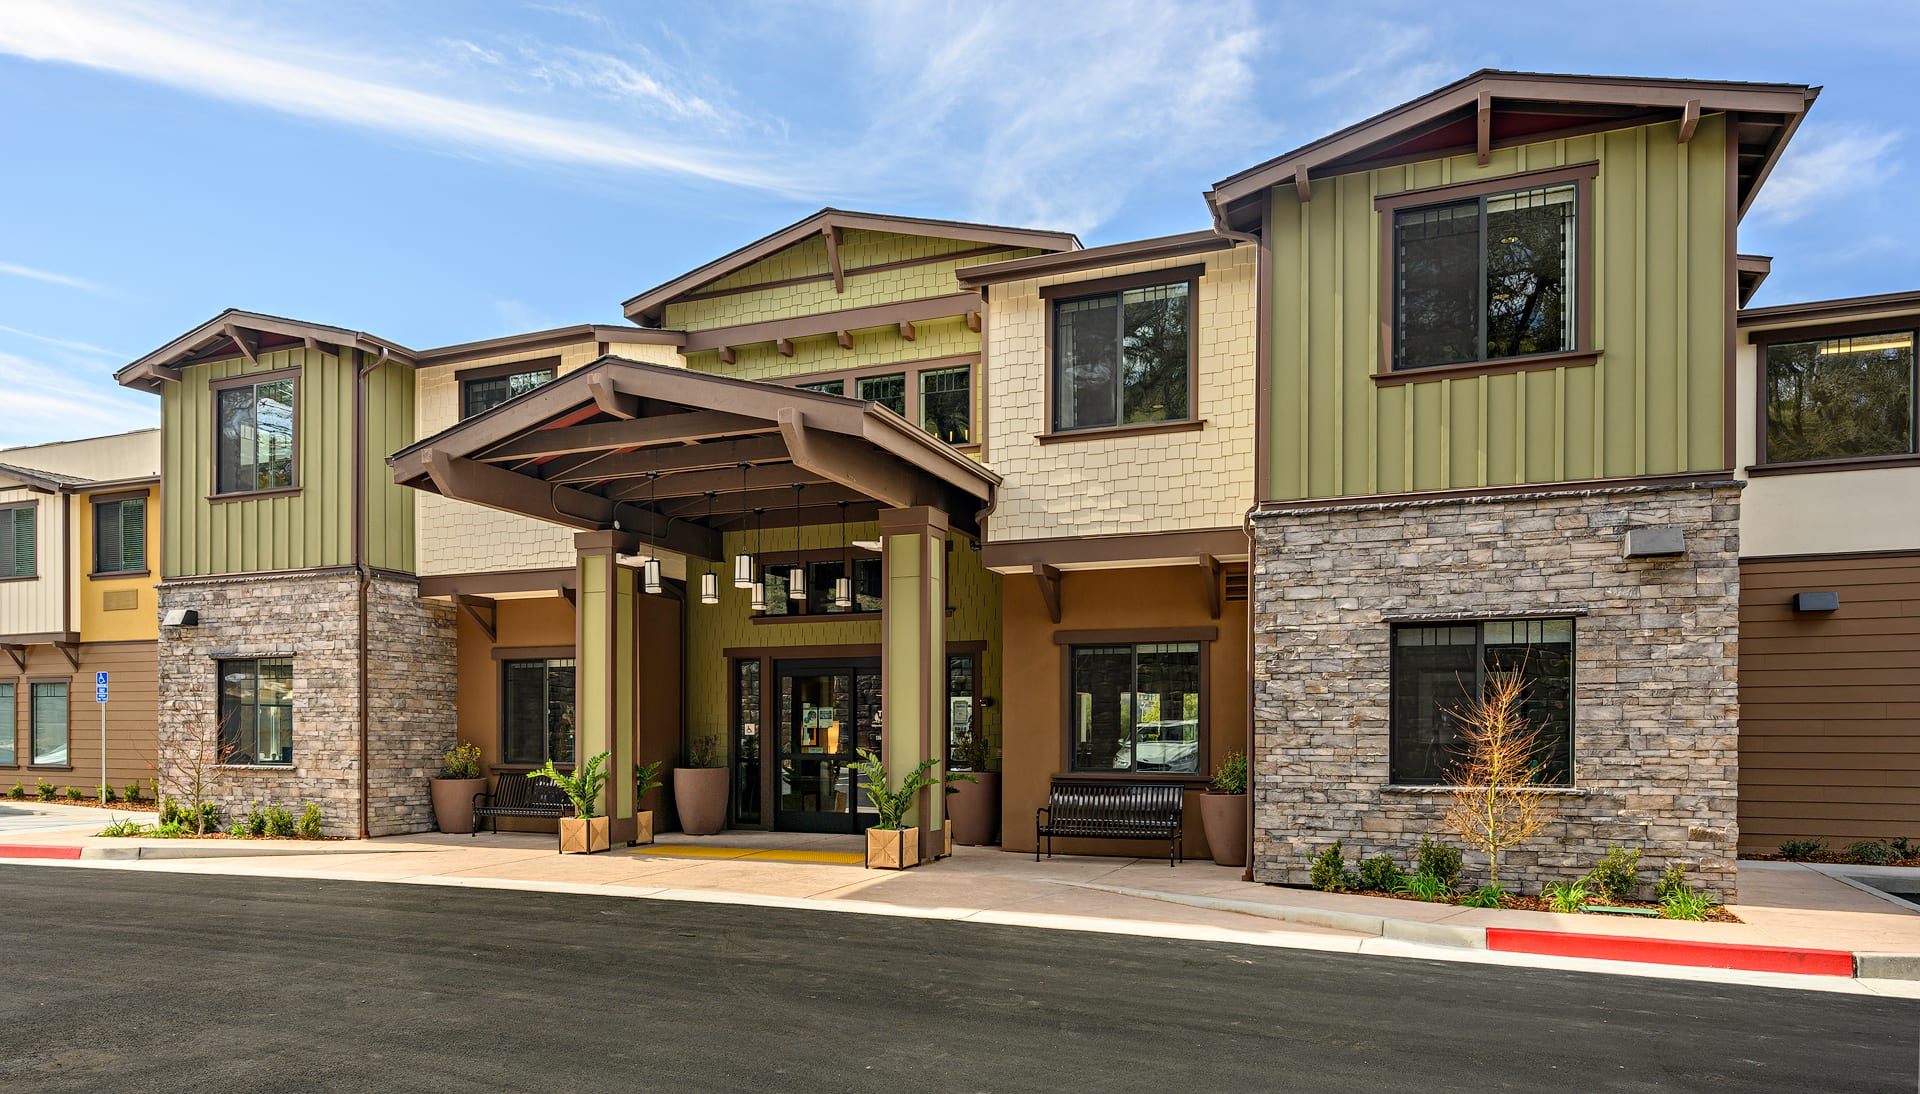 The Oaks at Paso Robles community exterior